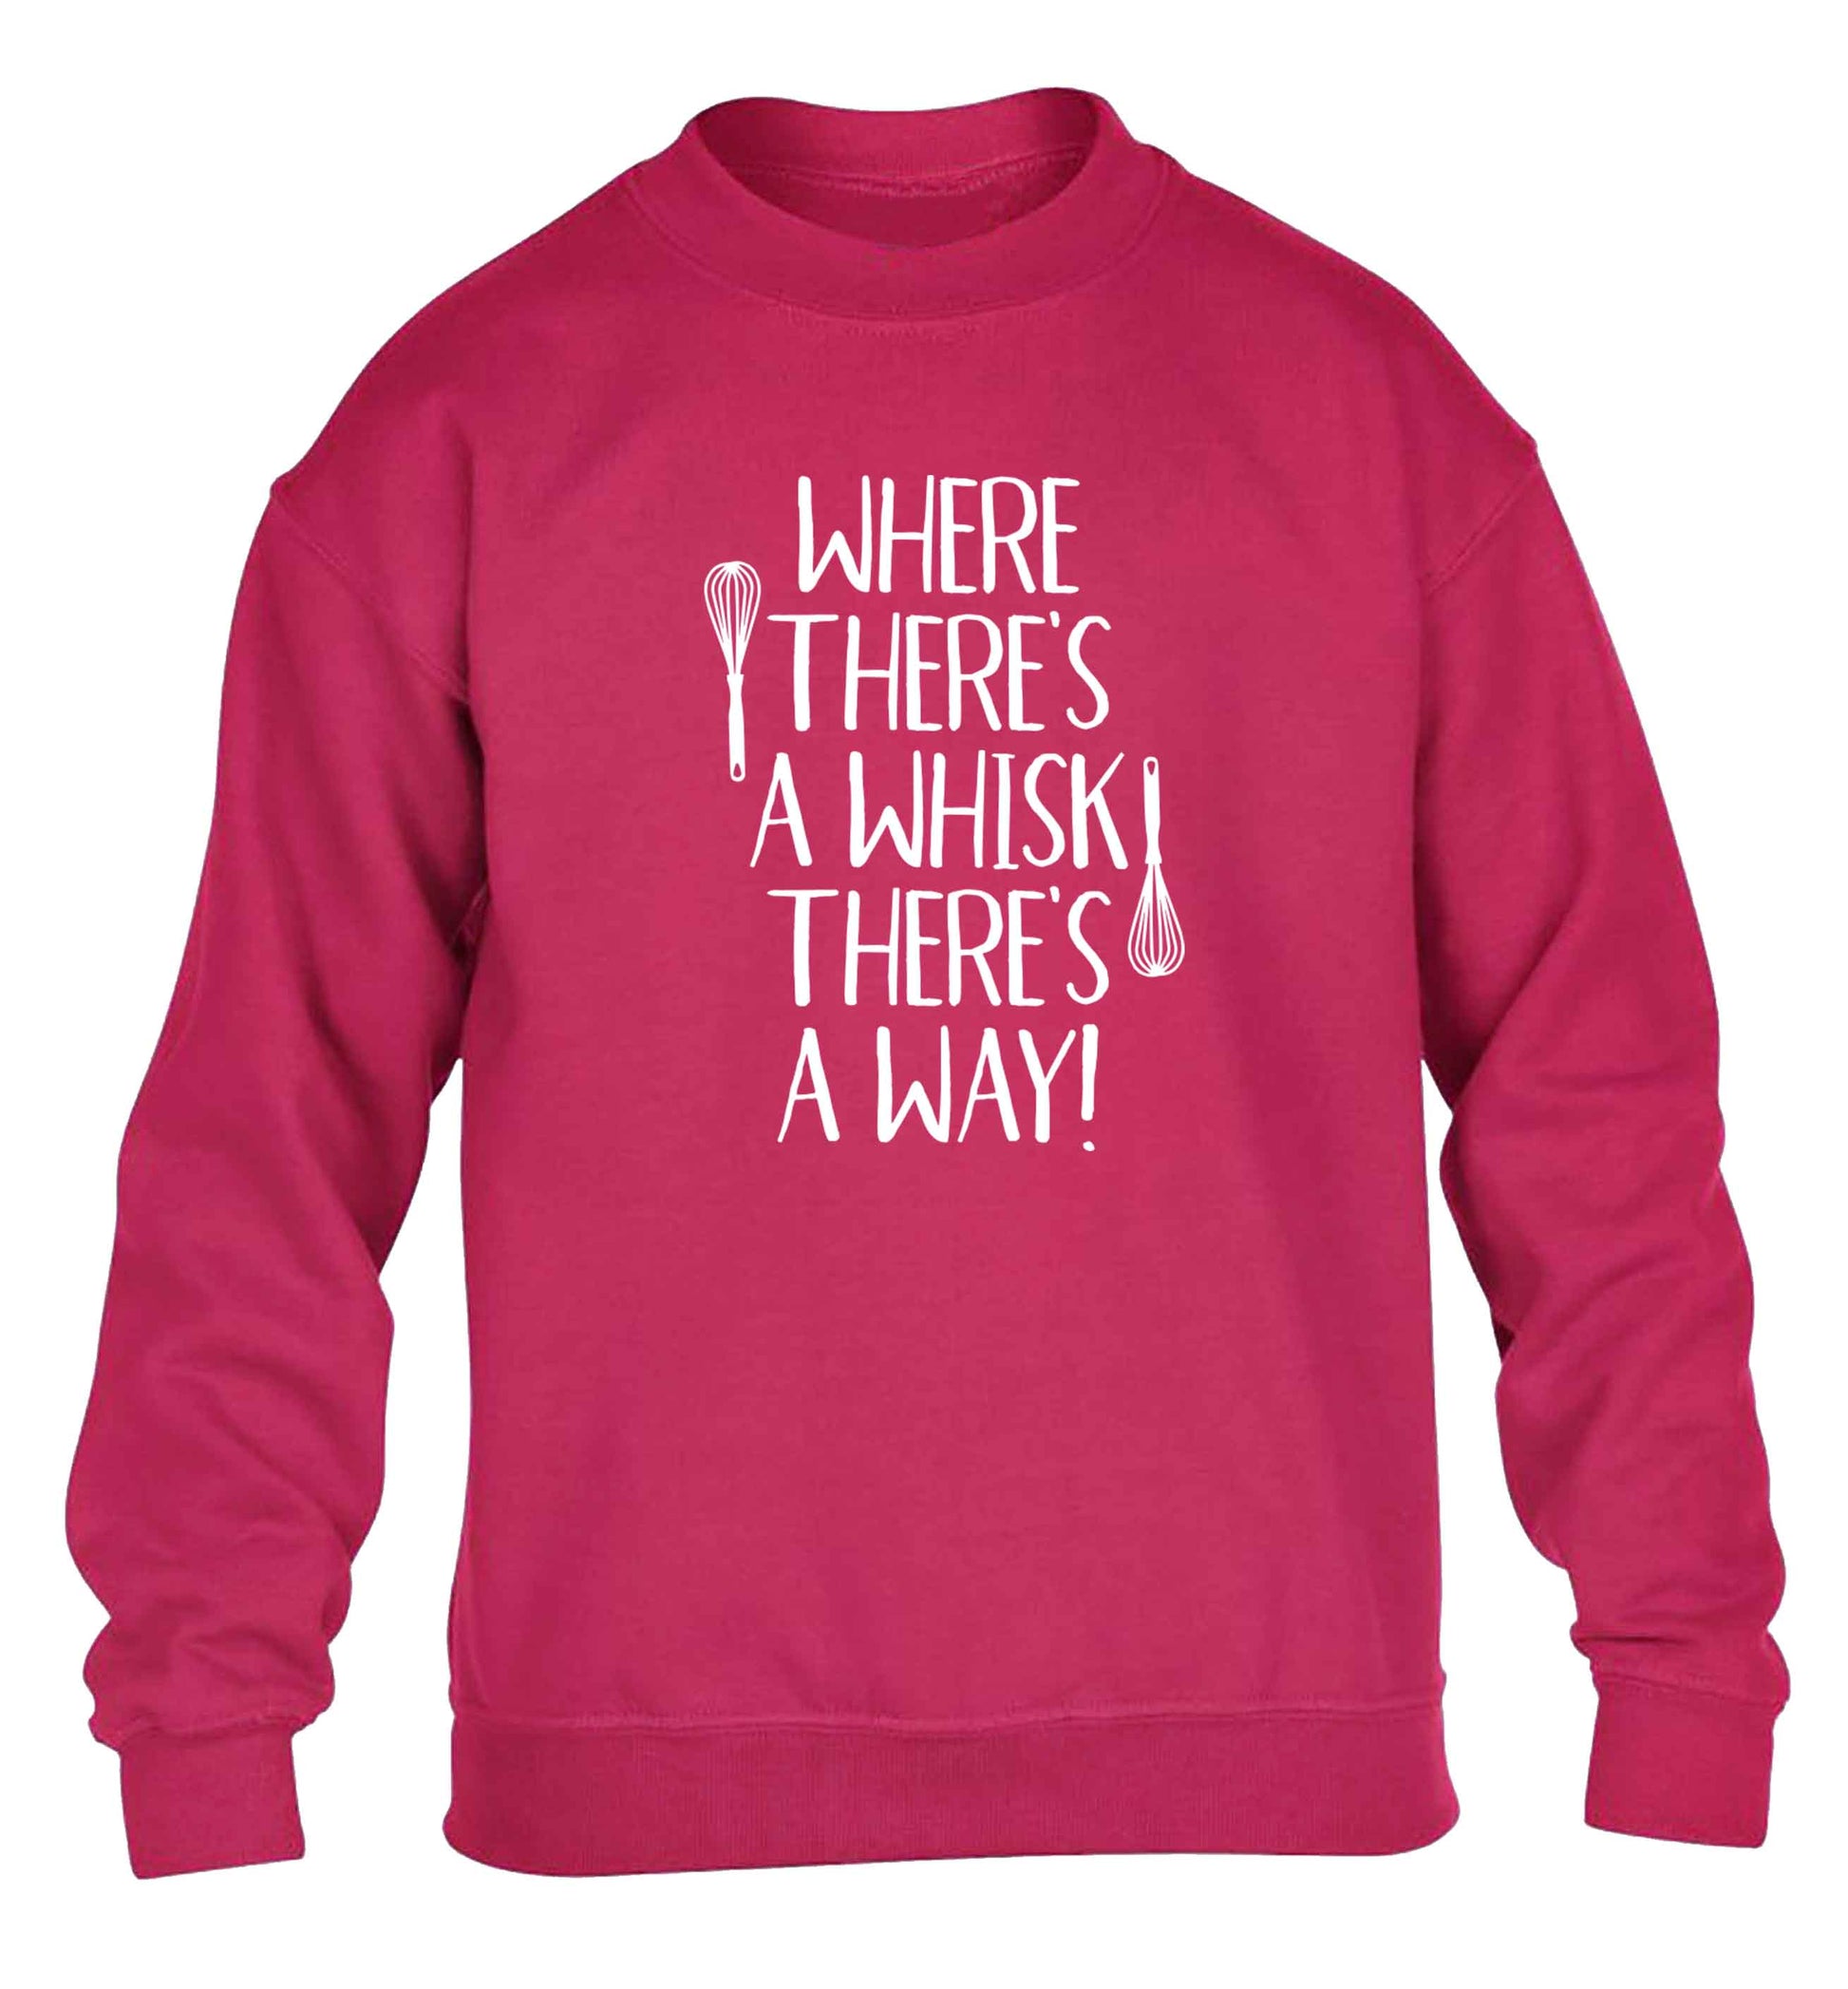 Where there's a whisk there's a way children's pink sweater 12-13 Years